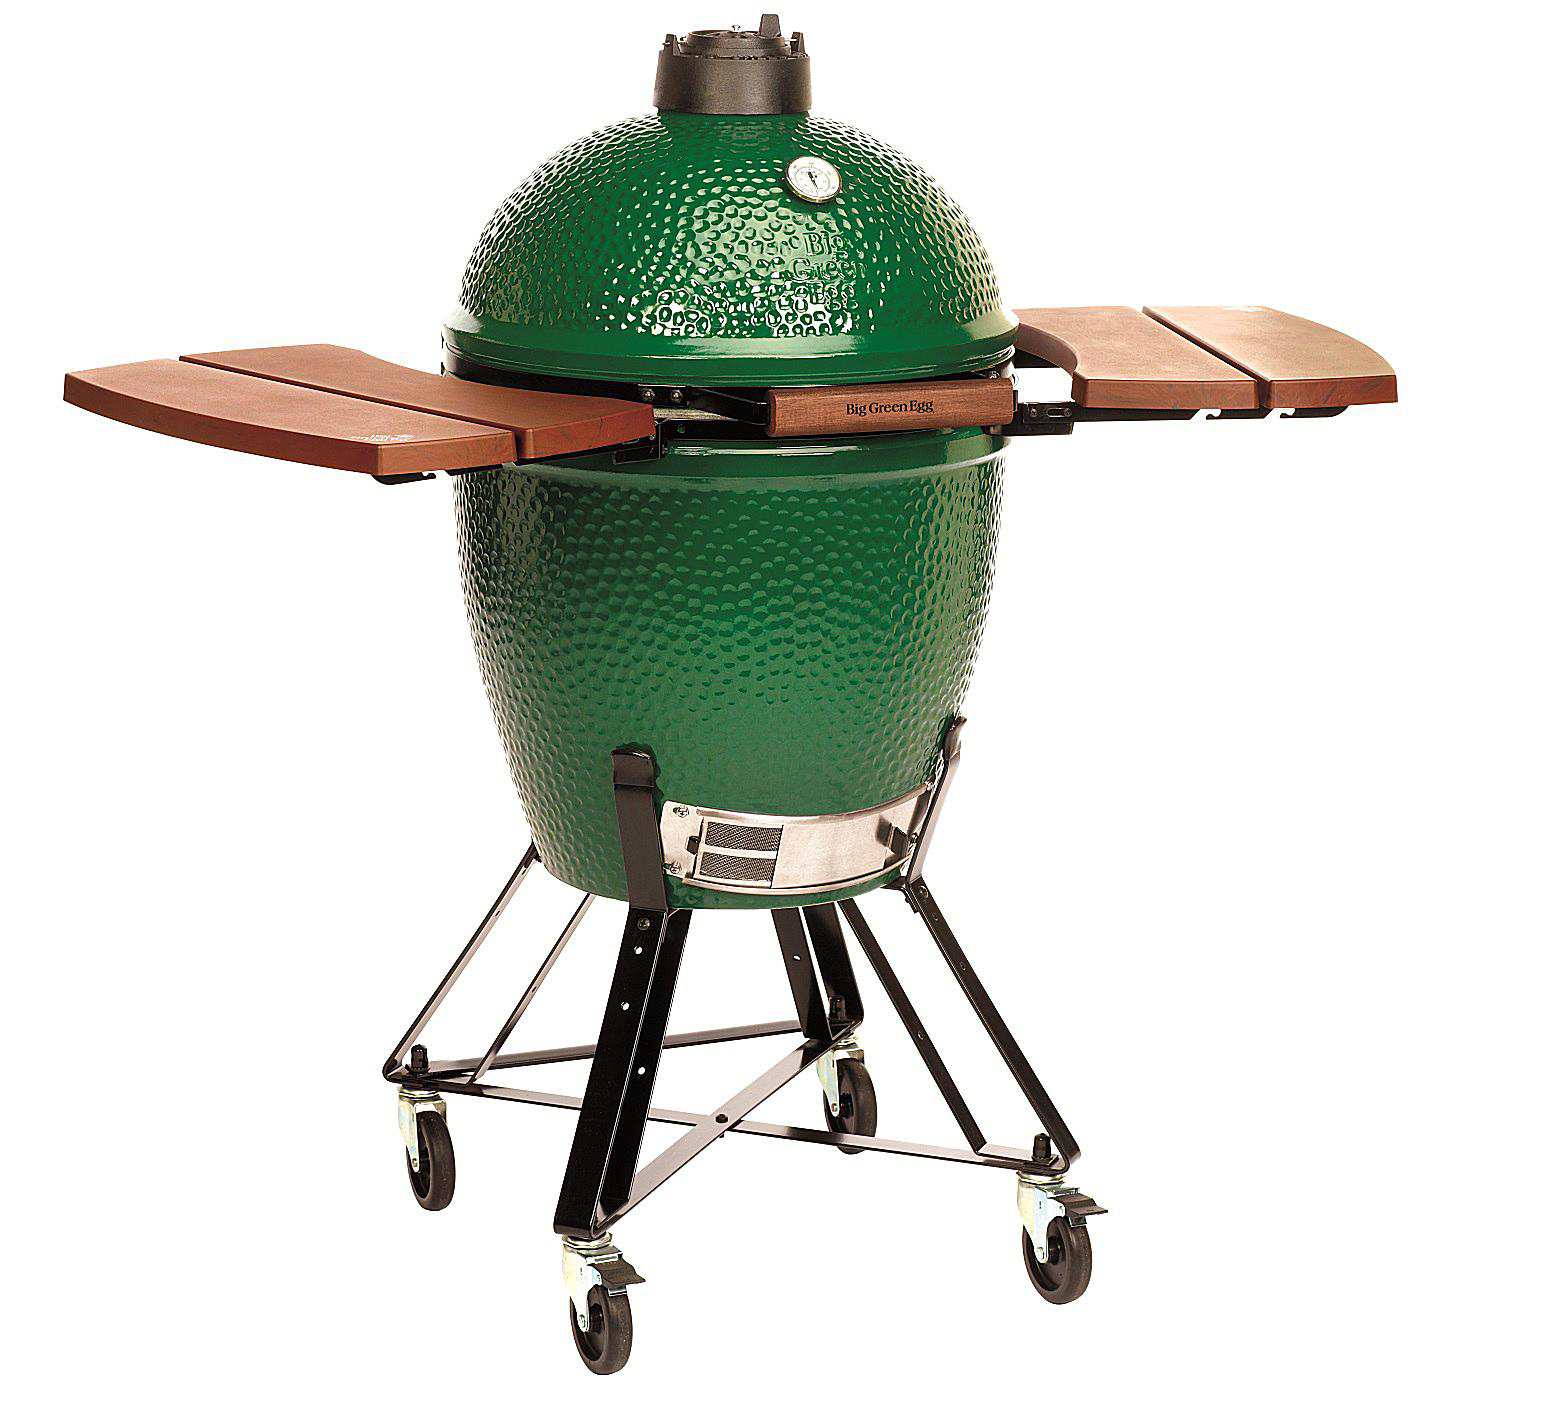 The 9 Best Kamado Grills and Smokers to Buy in 2018